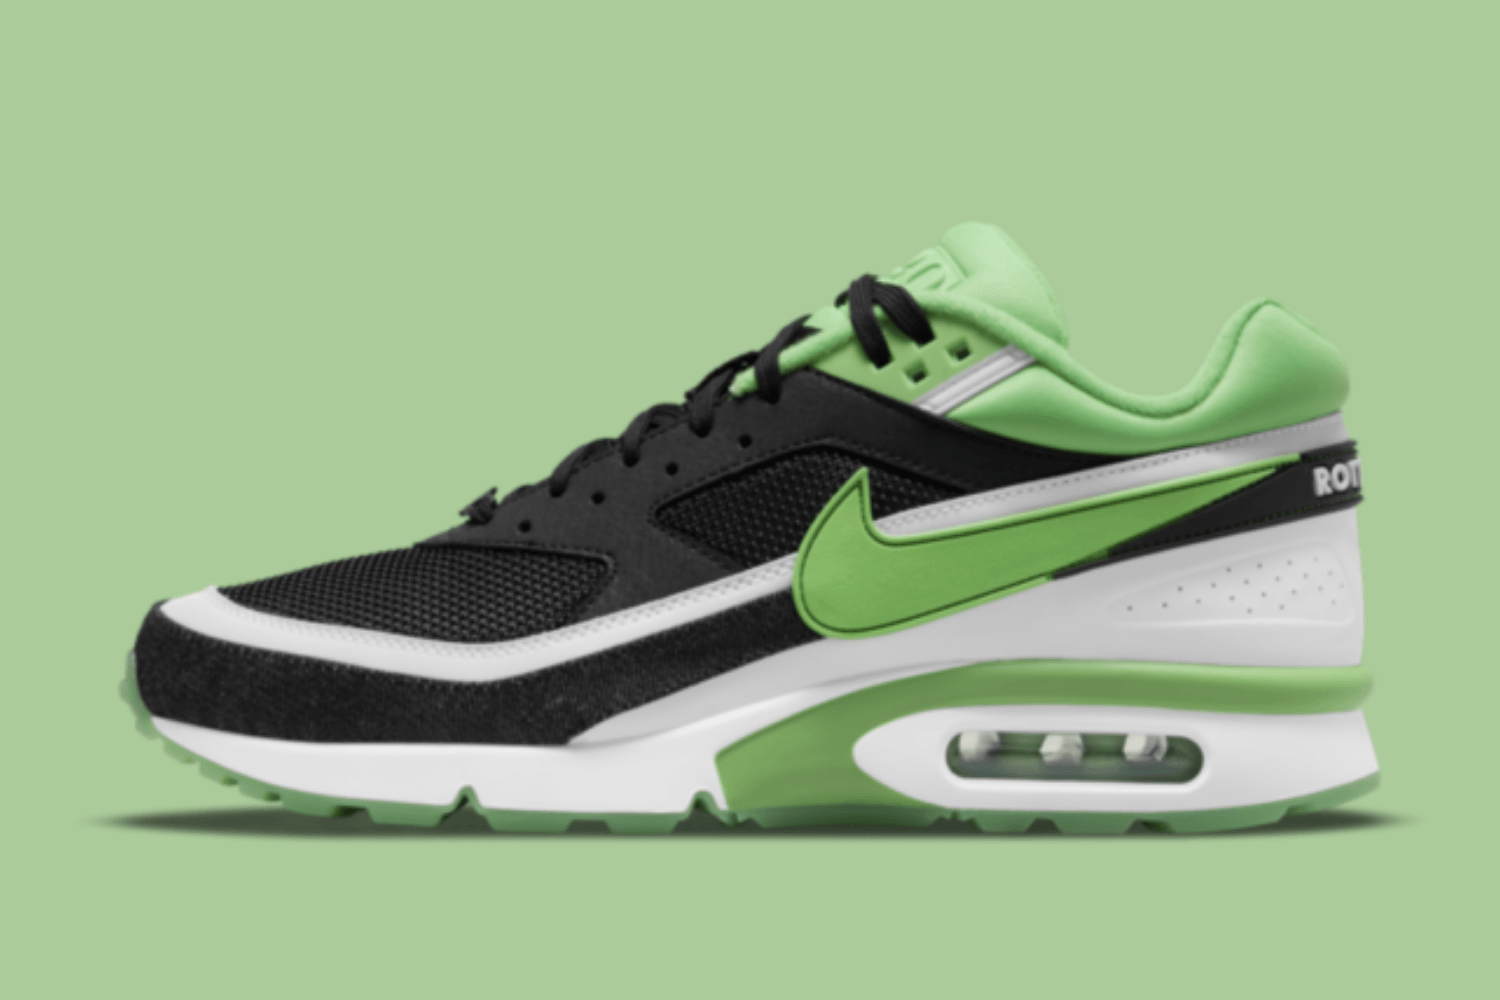 Air Max BW 'Rotterdam' exclusive at WOEI and SNKRS